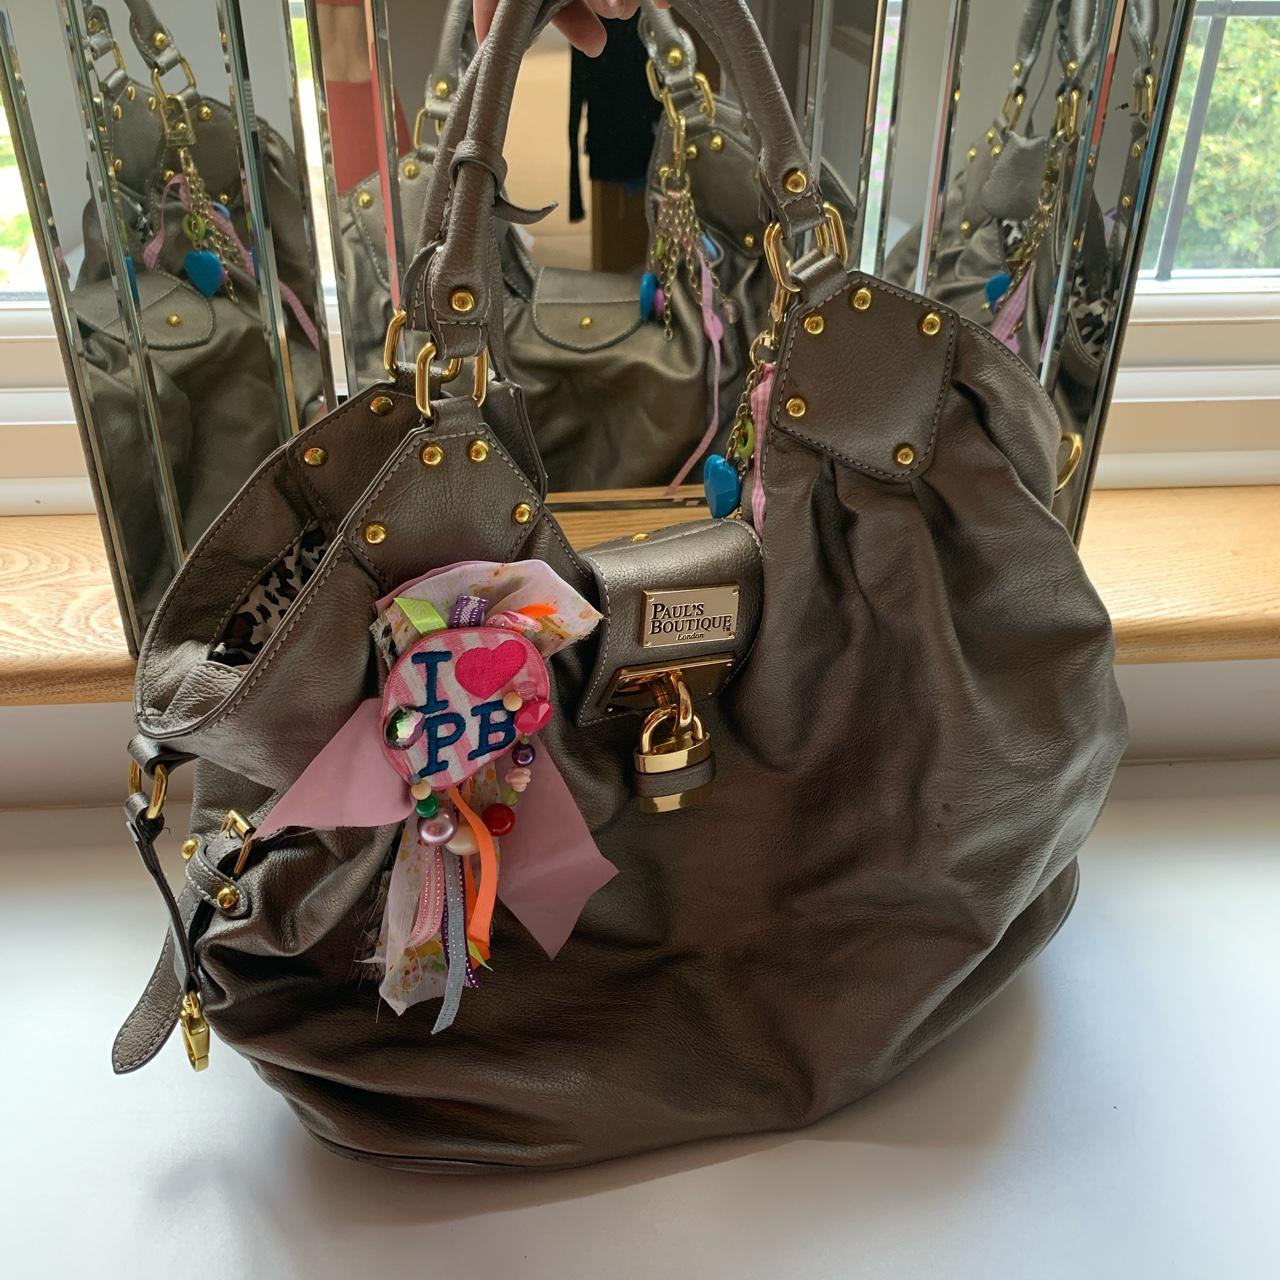 Pauls boutique in England  Handbags, Purses & Women's Bags for